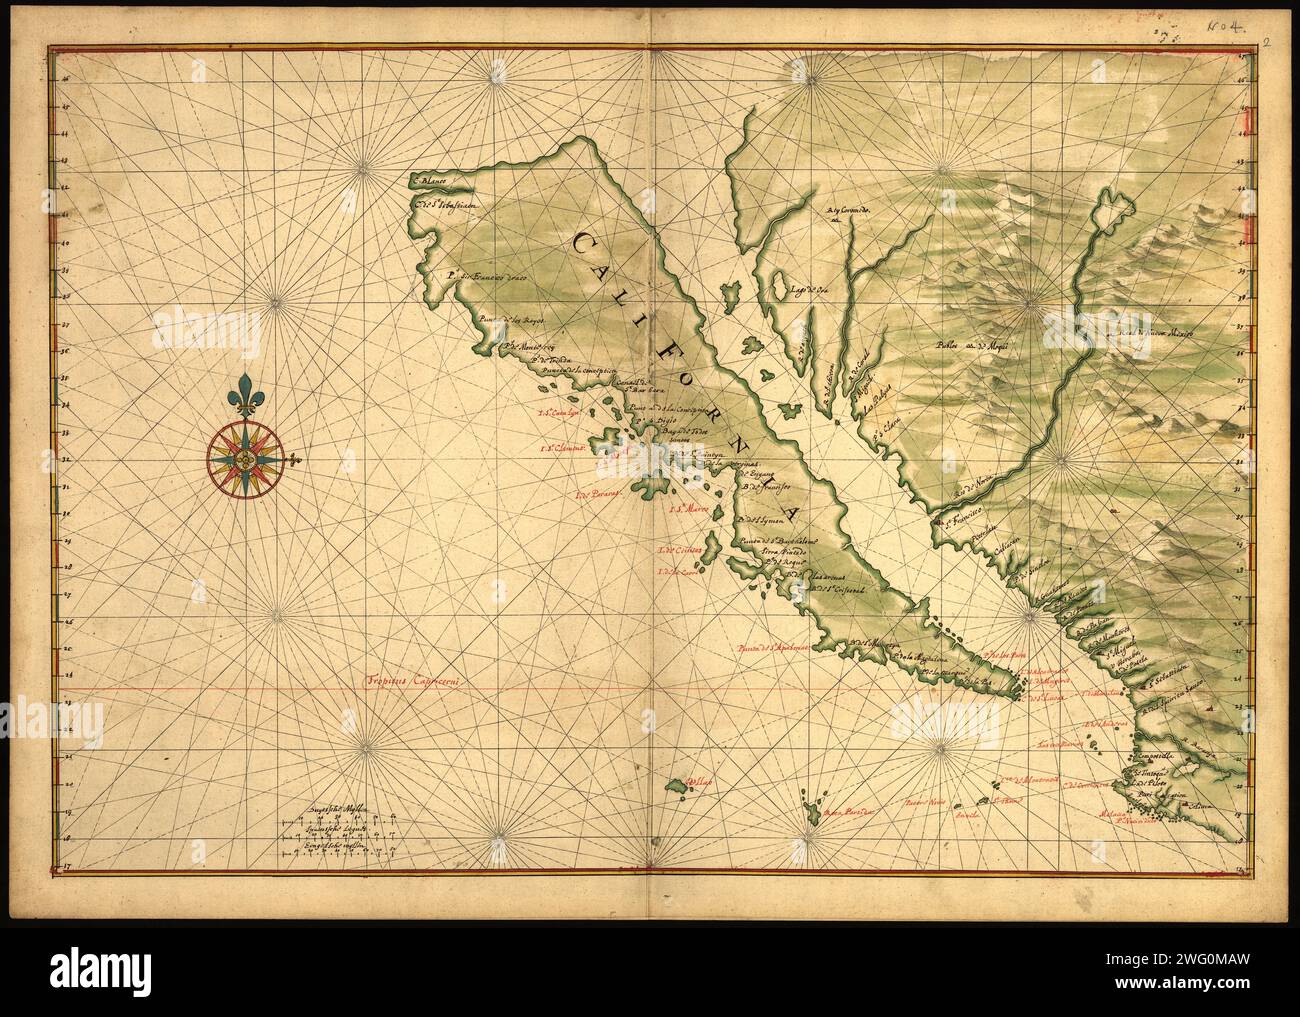 Map of California shown as an island, c 1650. This map from around 1650 shows California as an island. A half-century would pass before Spanish explorers determined with certainty that California was connected to the mainland of North America. Place names are carefully indicated on the map in red and black, and include, for example, Cape San Lucas (at the tip of present-day Baja California), Mexico, and the Tres Maria Islands off the coast of the Mexican mainland. Joan Vinckeboons (1617-70) was a Dutch cartographer and engraver born into a family of artists of Flemish origin. He was in the emp Stock Photo